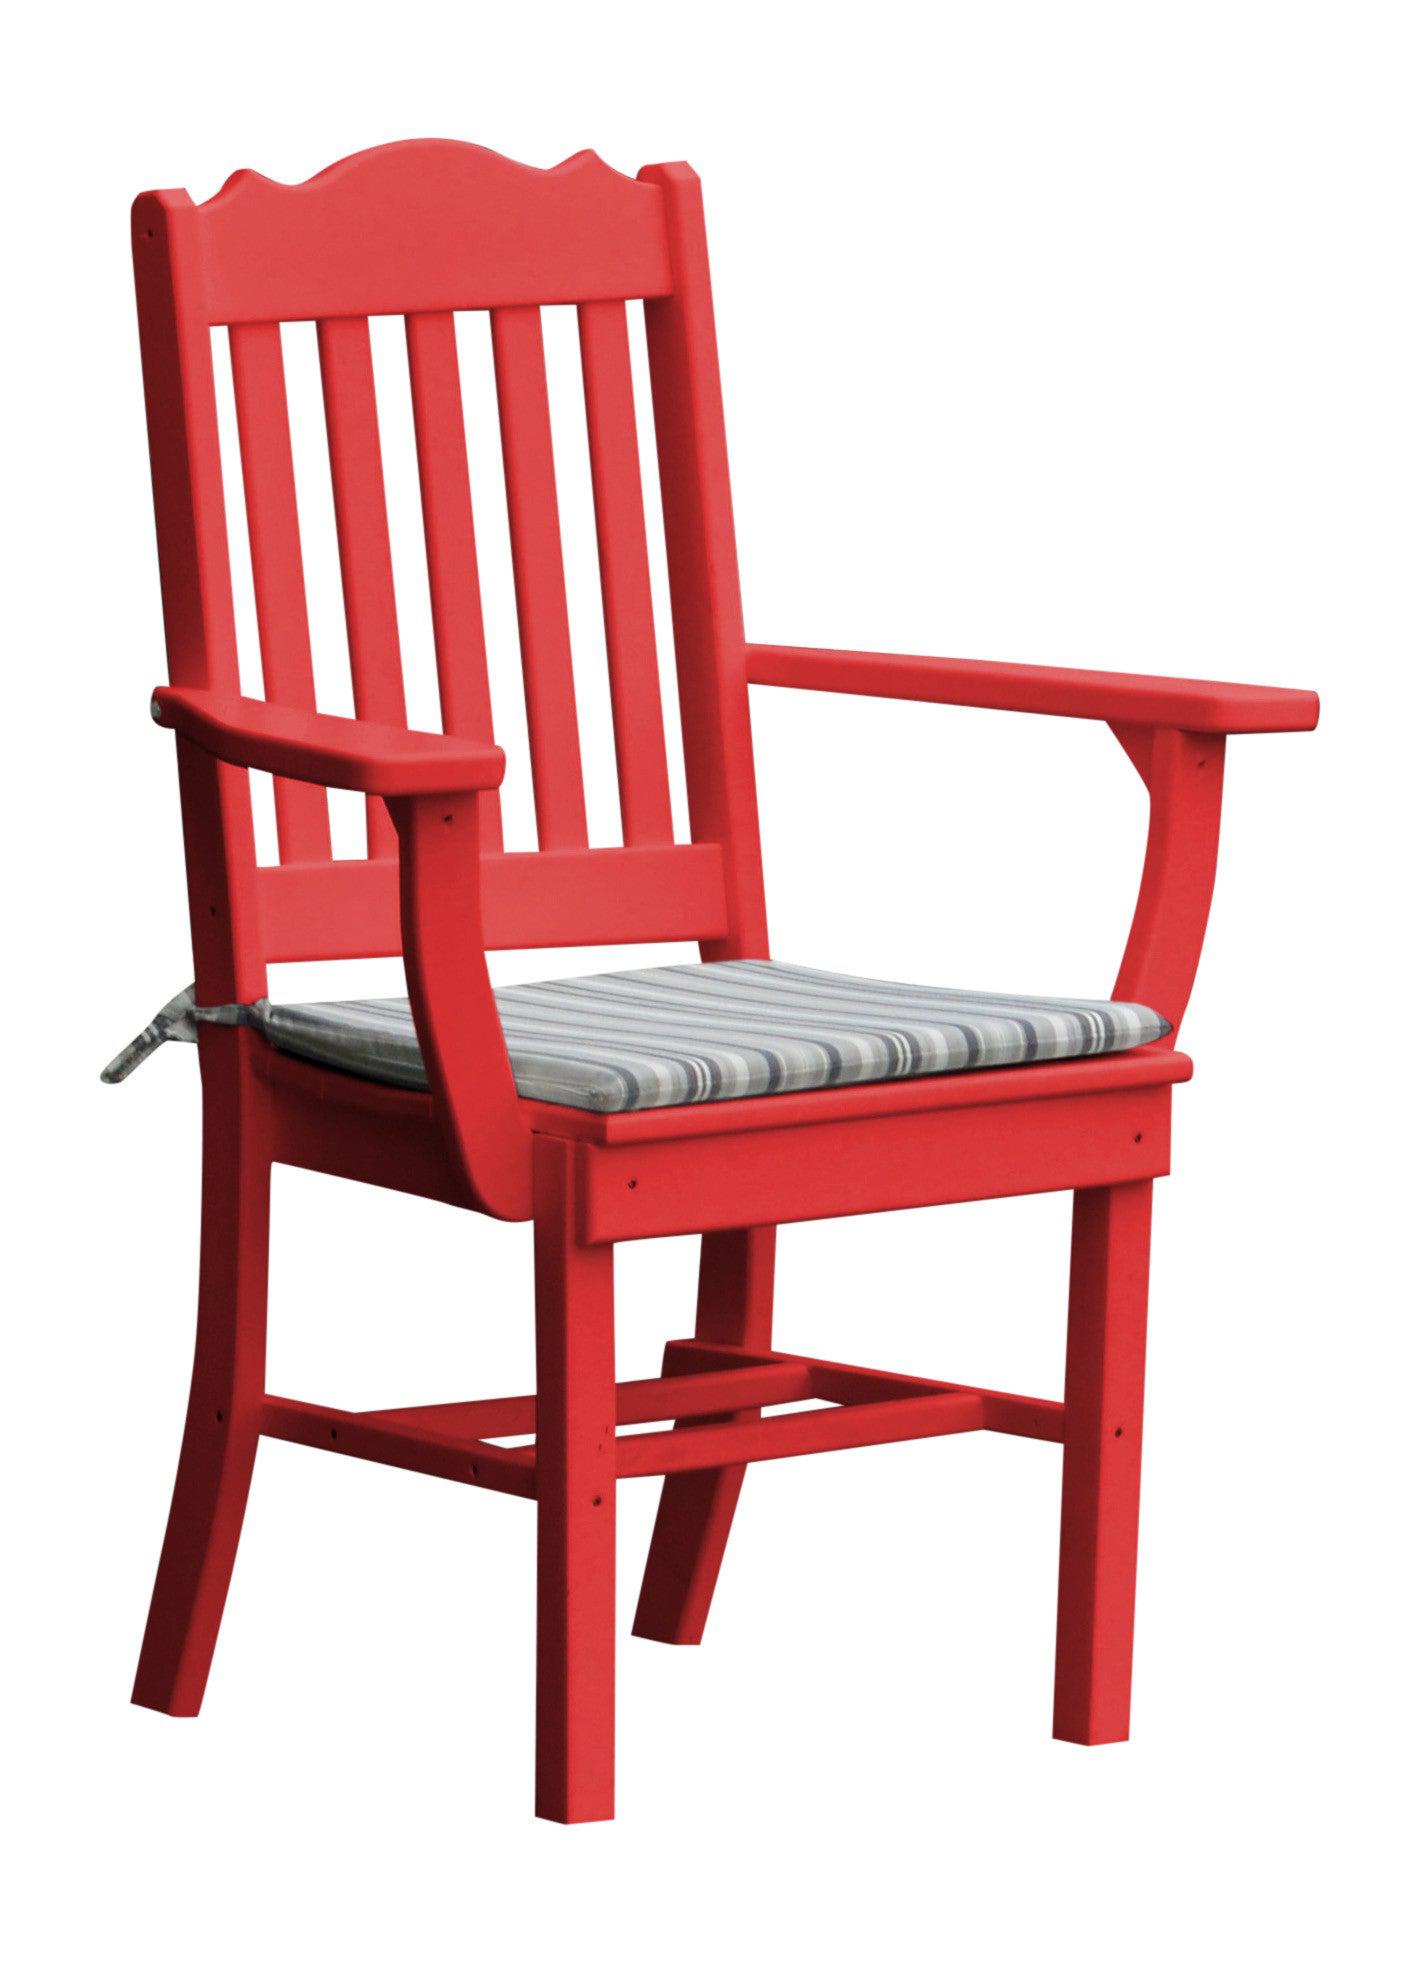 A&L Furniture Company Recycled Plastic Royal Dining Chair w/ Arms - Bright Red